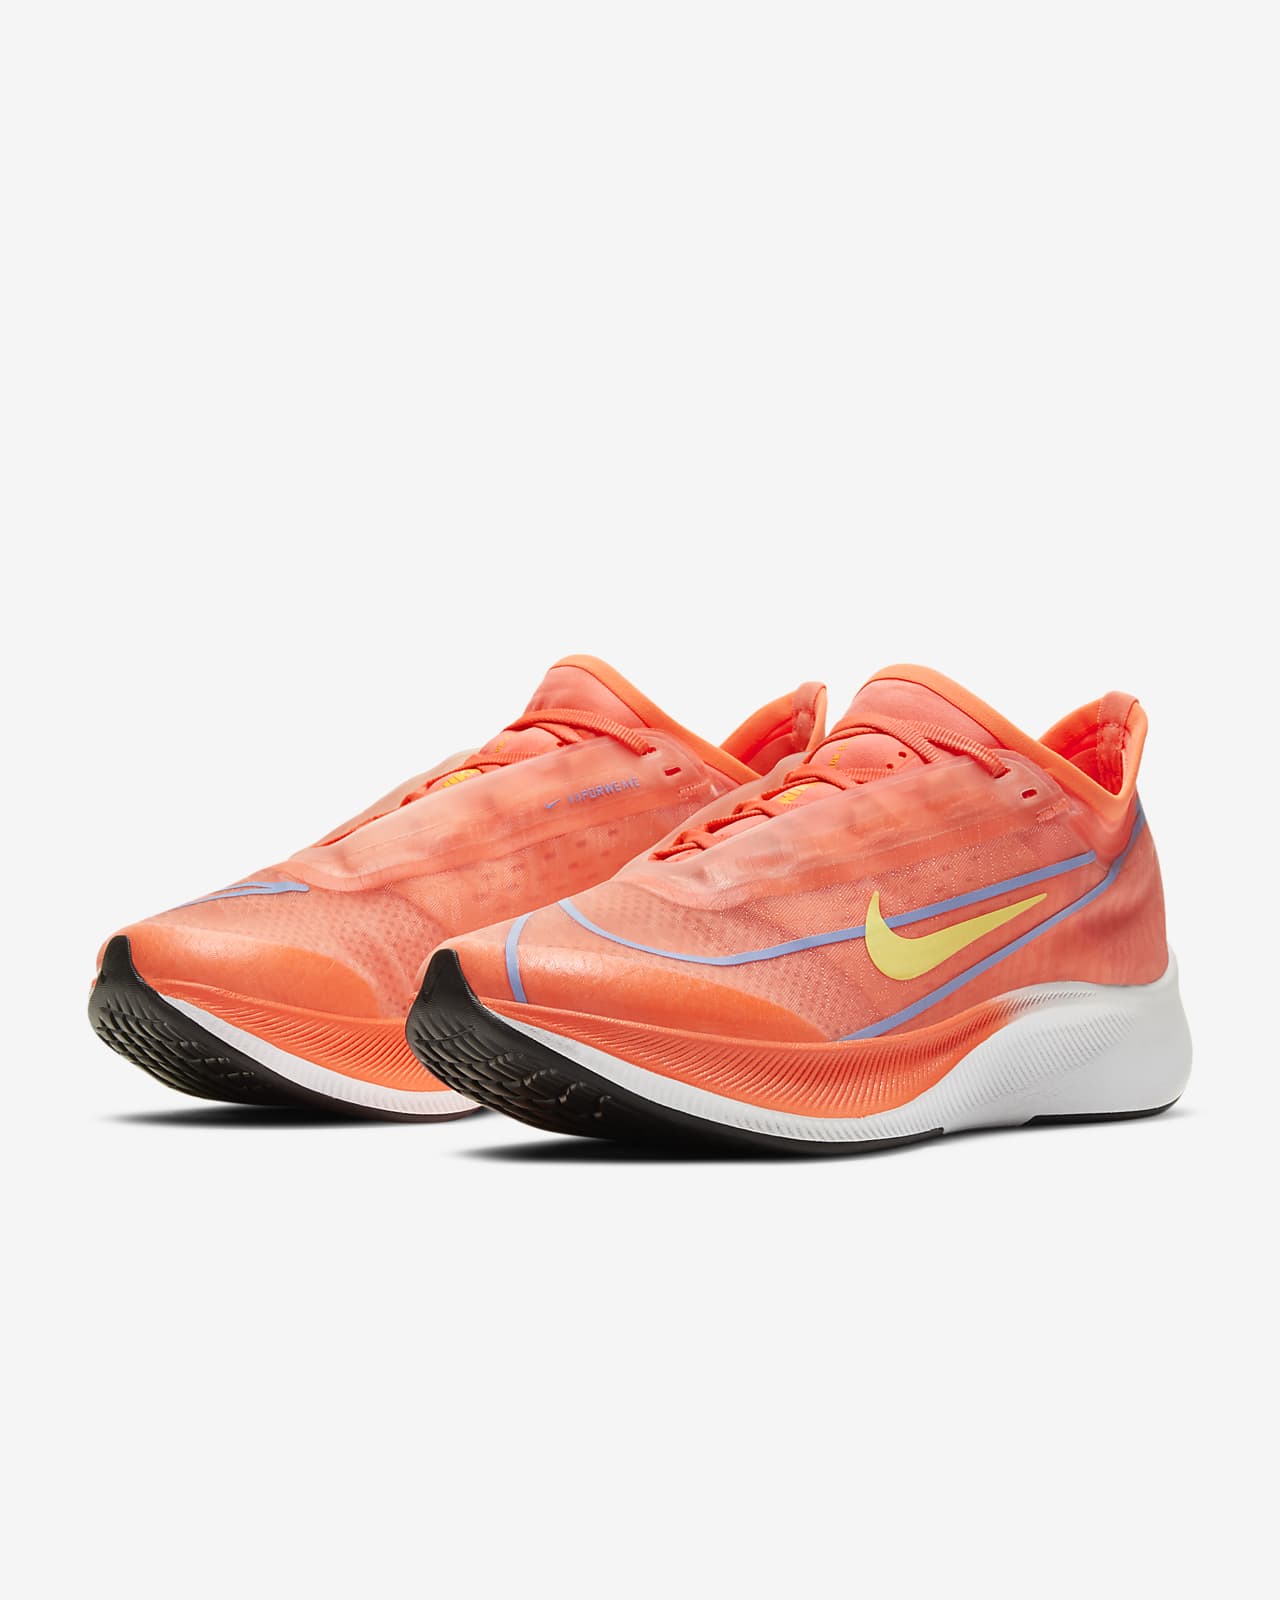 red nike womens running shoes